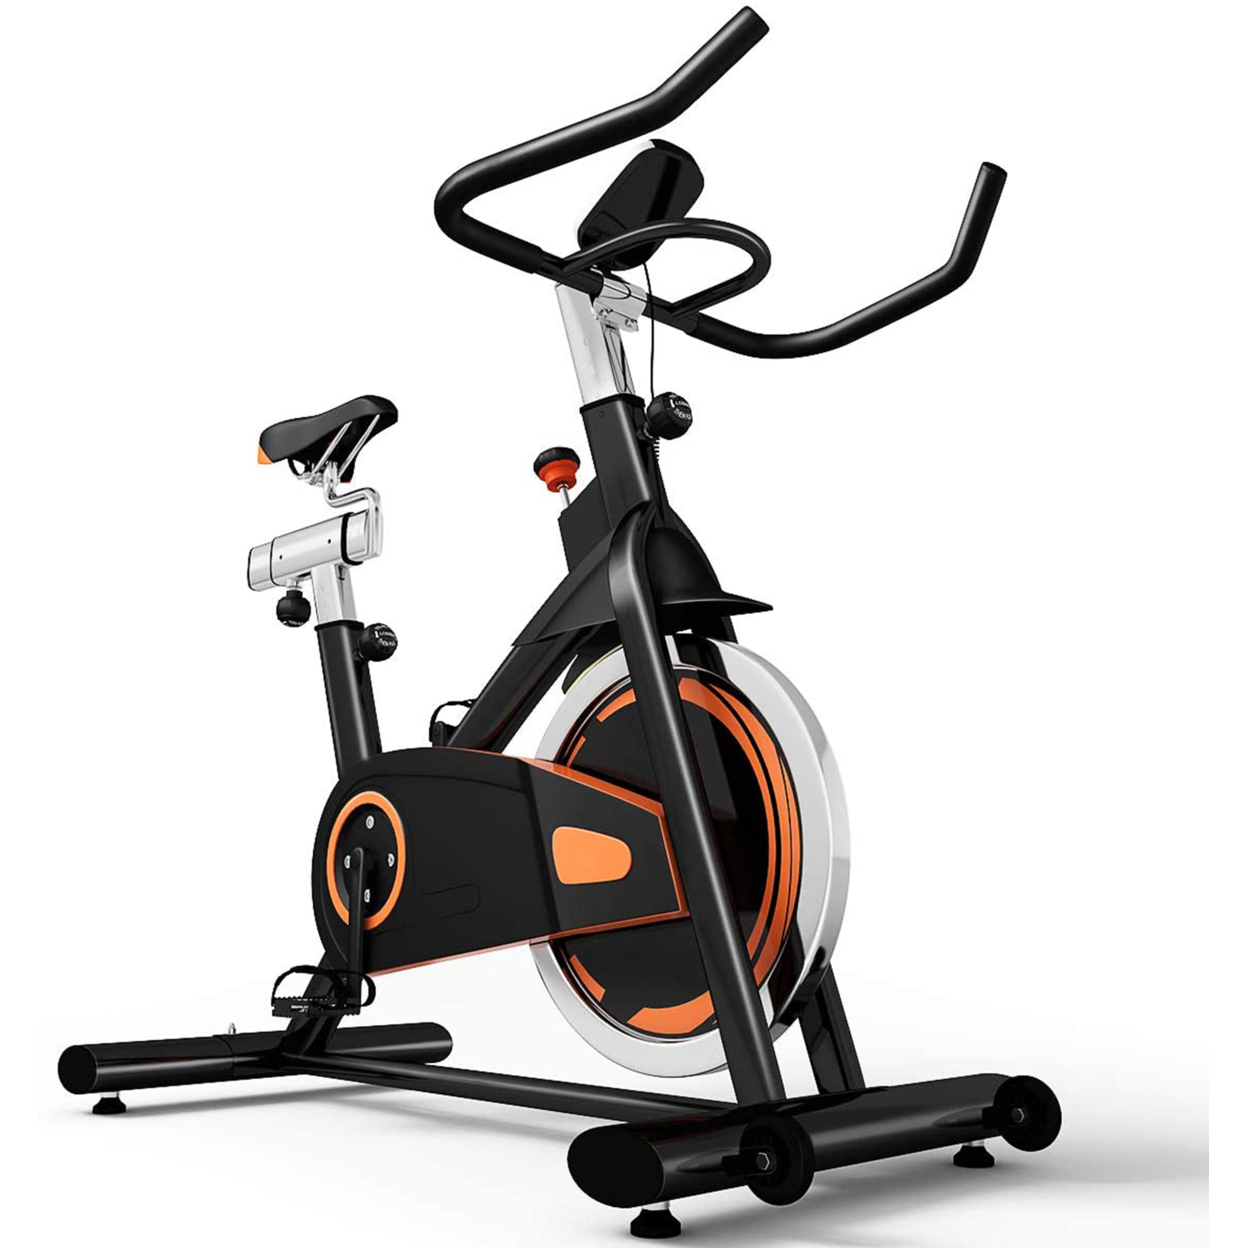 Cardio Fitness Cycling Exercise Bike Gym Workout Stationary Bicycle